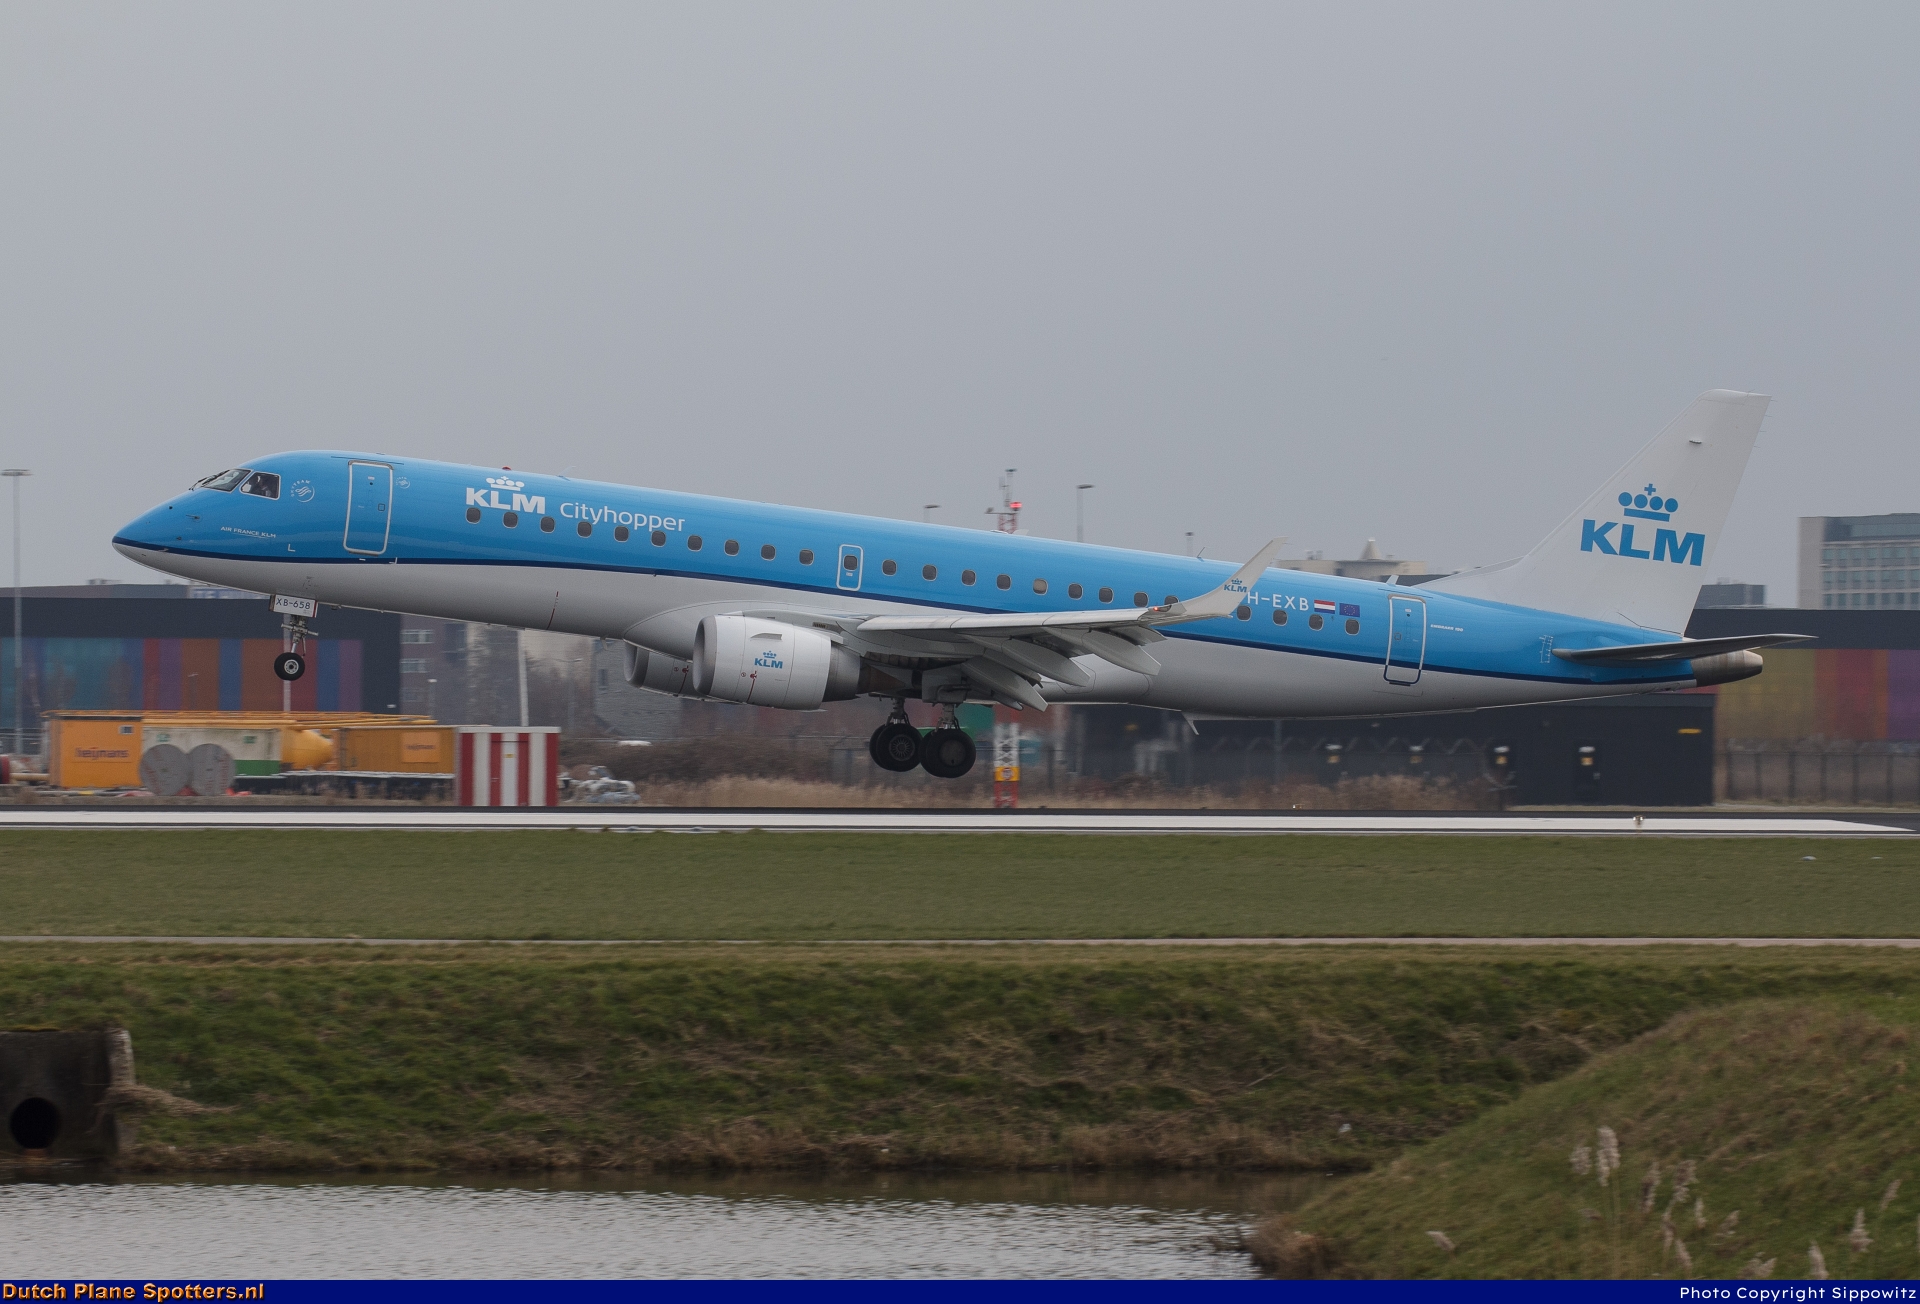 PH-EXB Embraer 190 KLM Cityhopper by Sippowitz